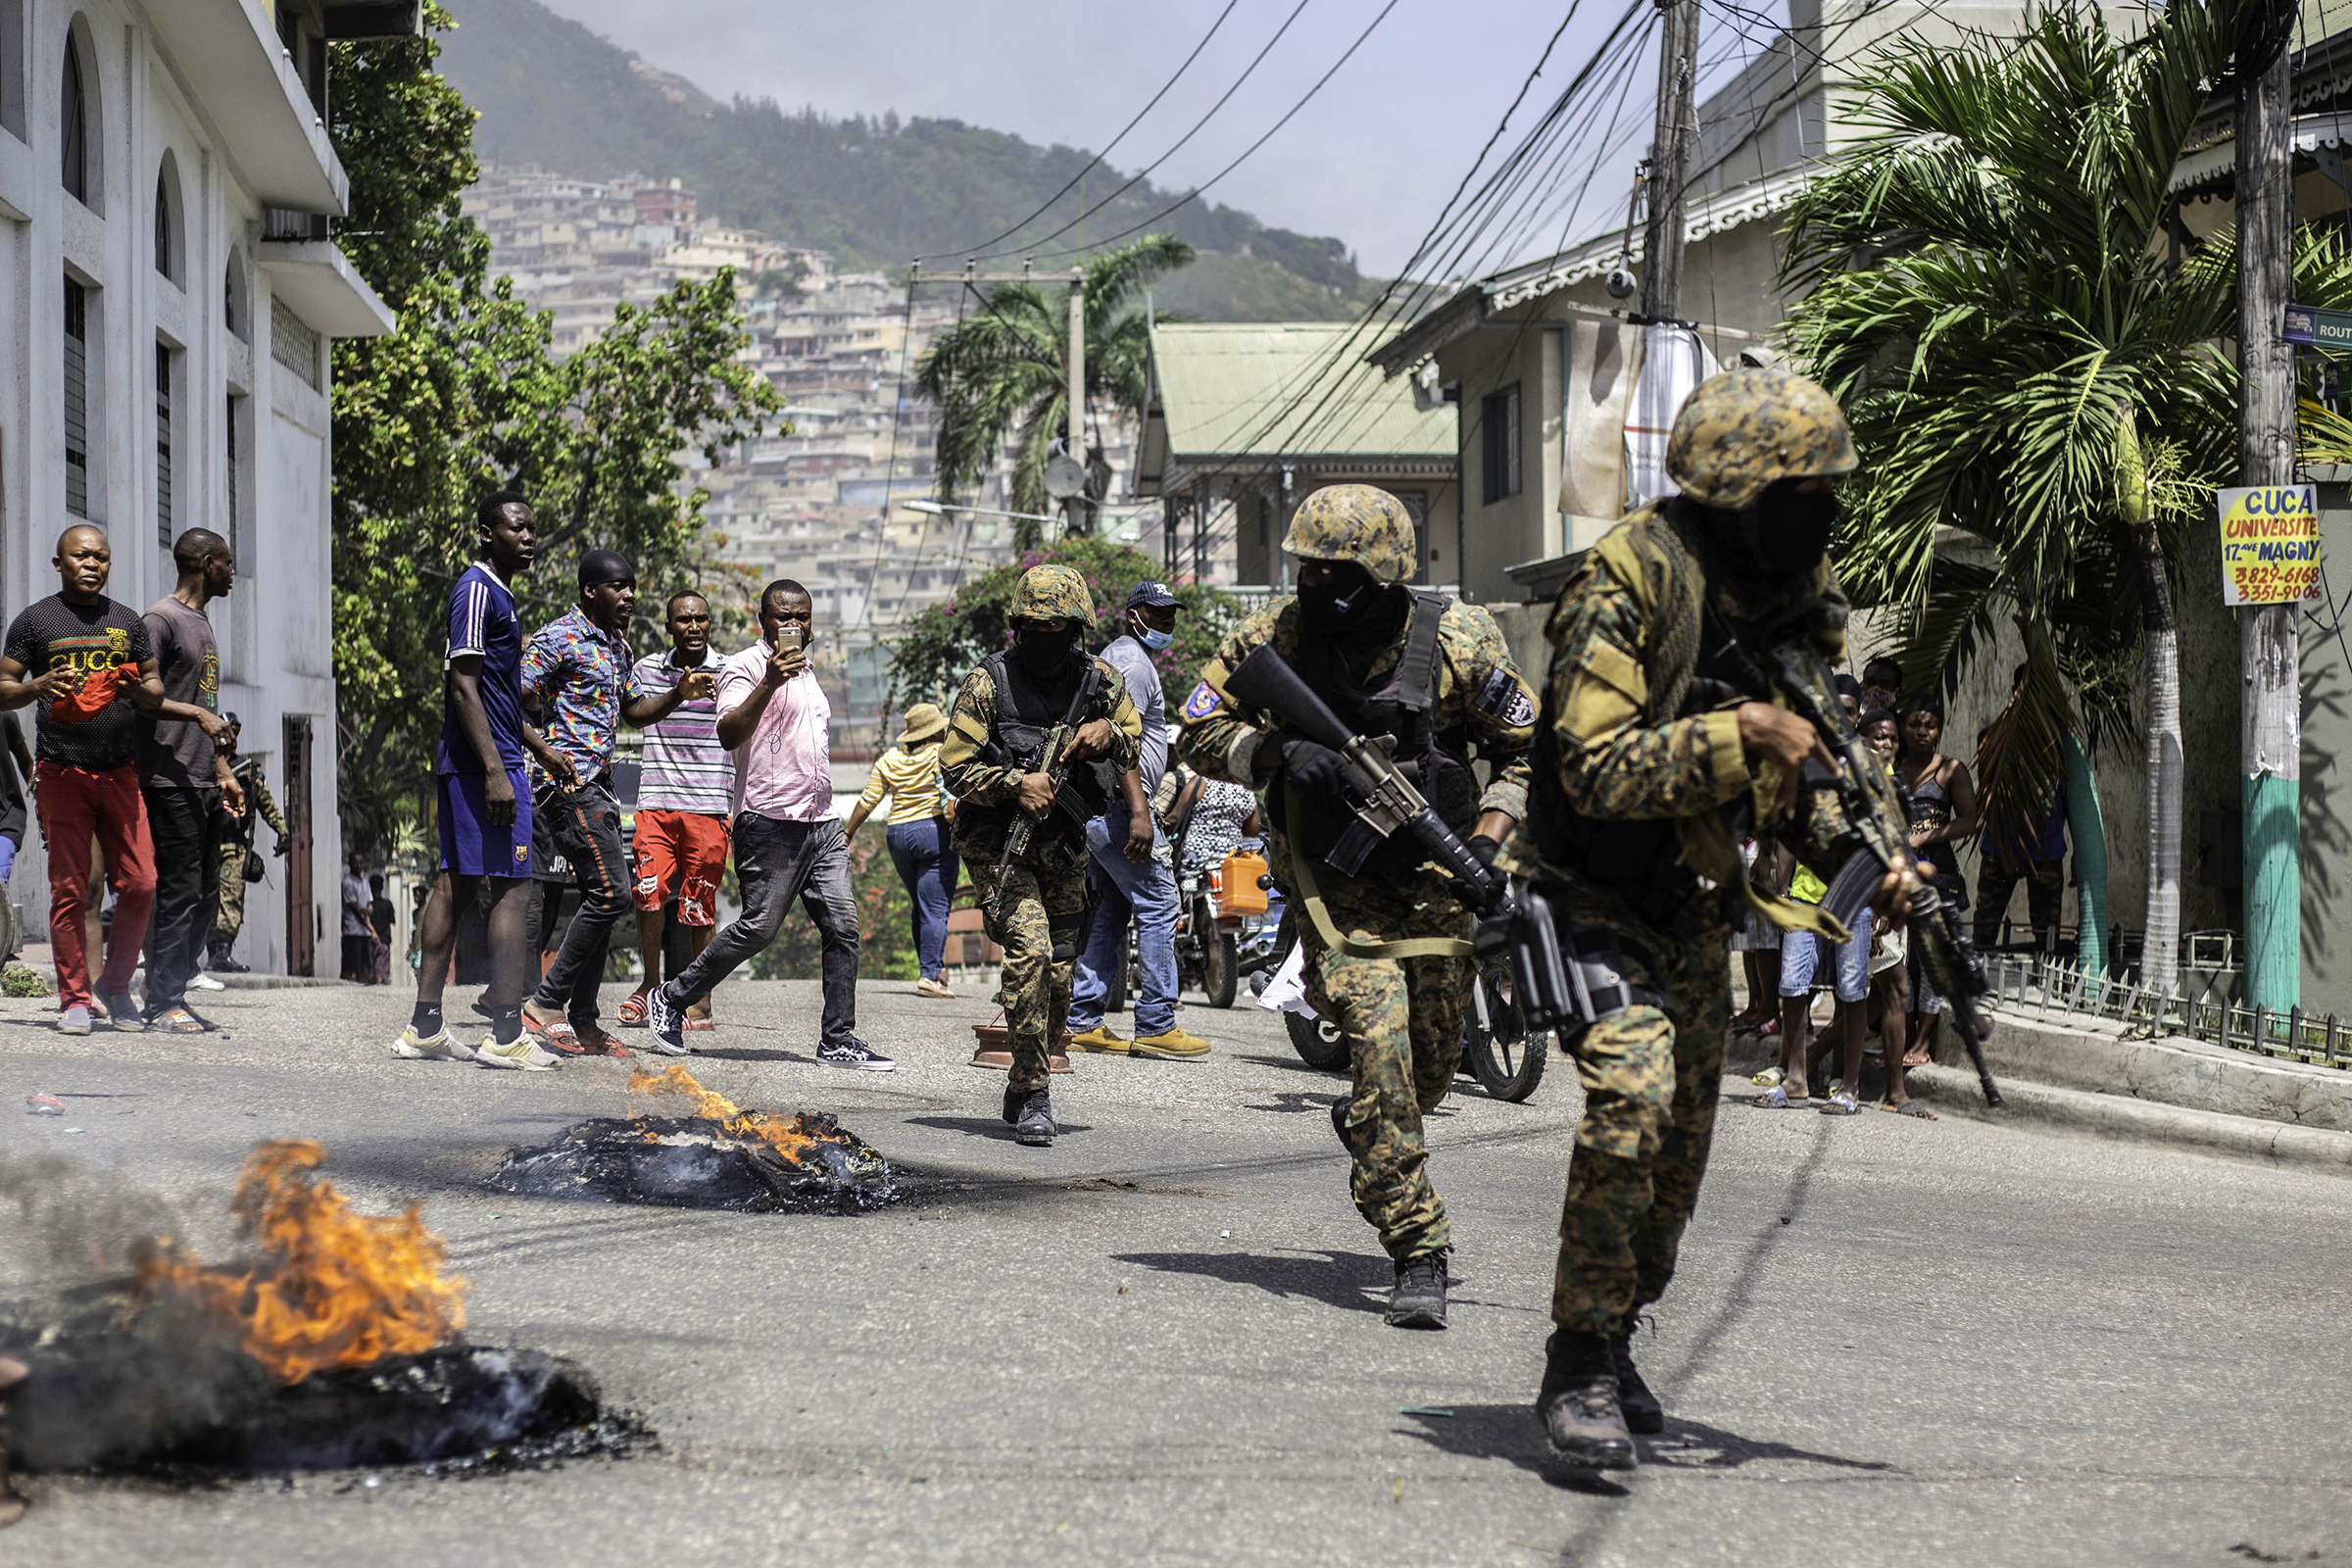 Citizens take part in a protest near the police station of Petion Ville after Haitian president Jovenel Moïse was murdered in Port-au-Prince, Haiti, on July 8, 2021. (Richard Pierrin—Getty Images)